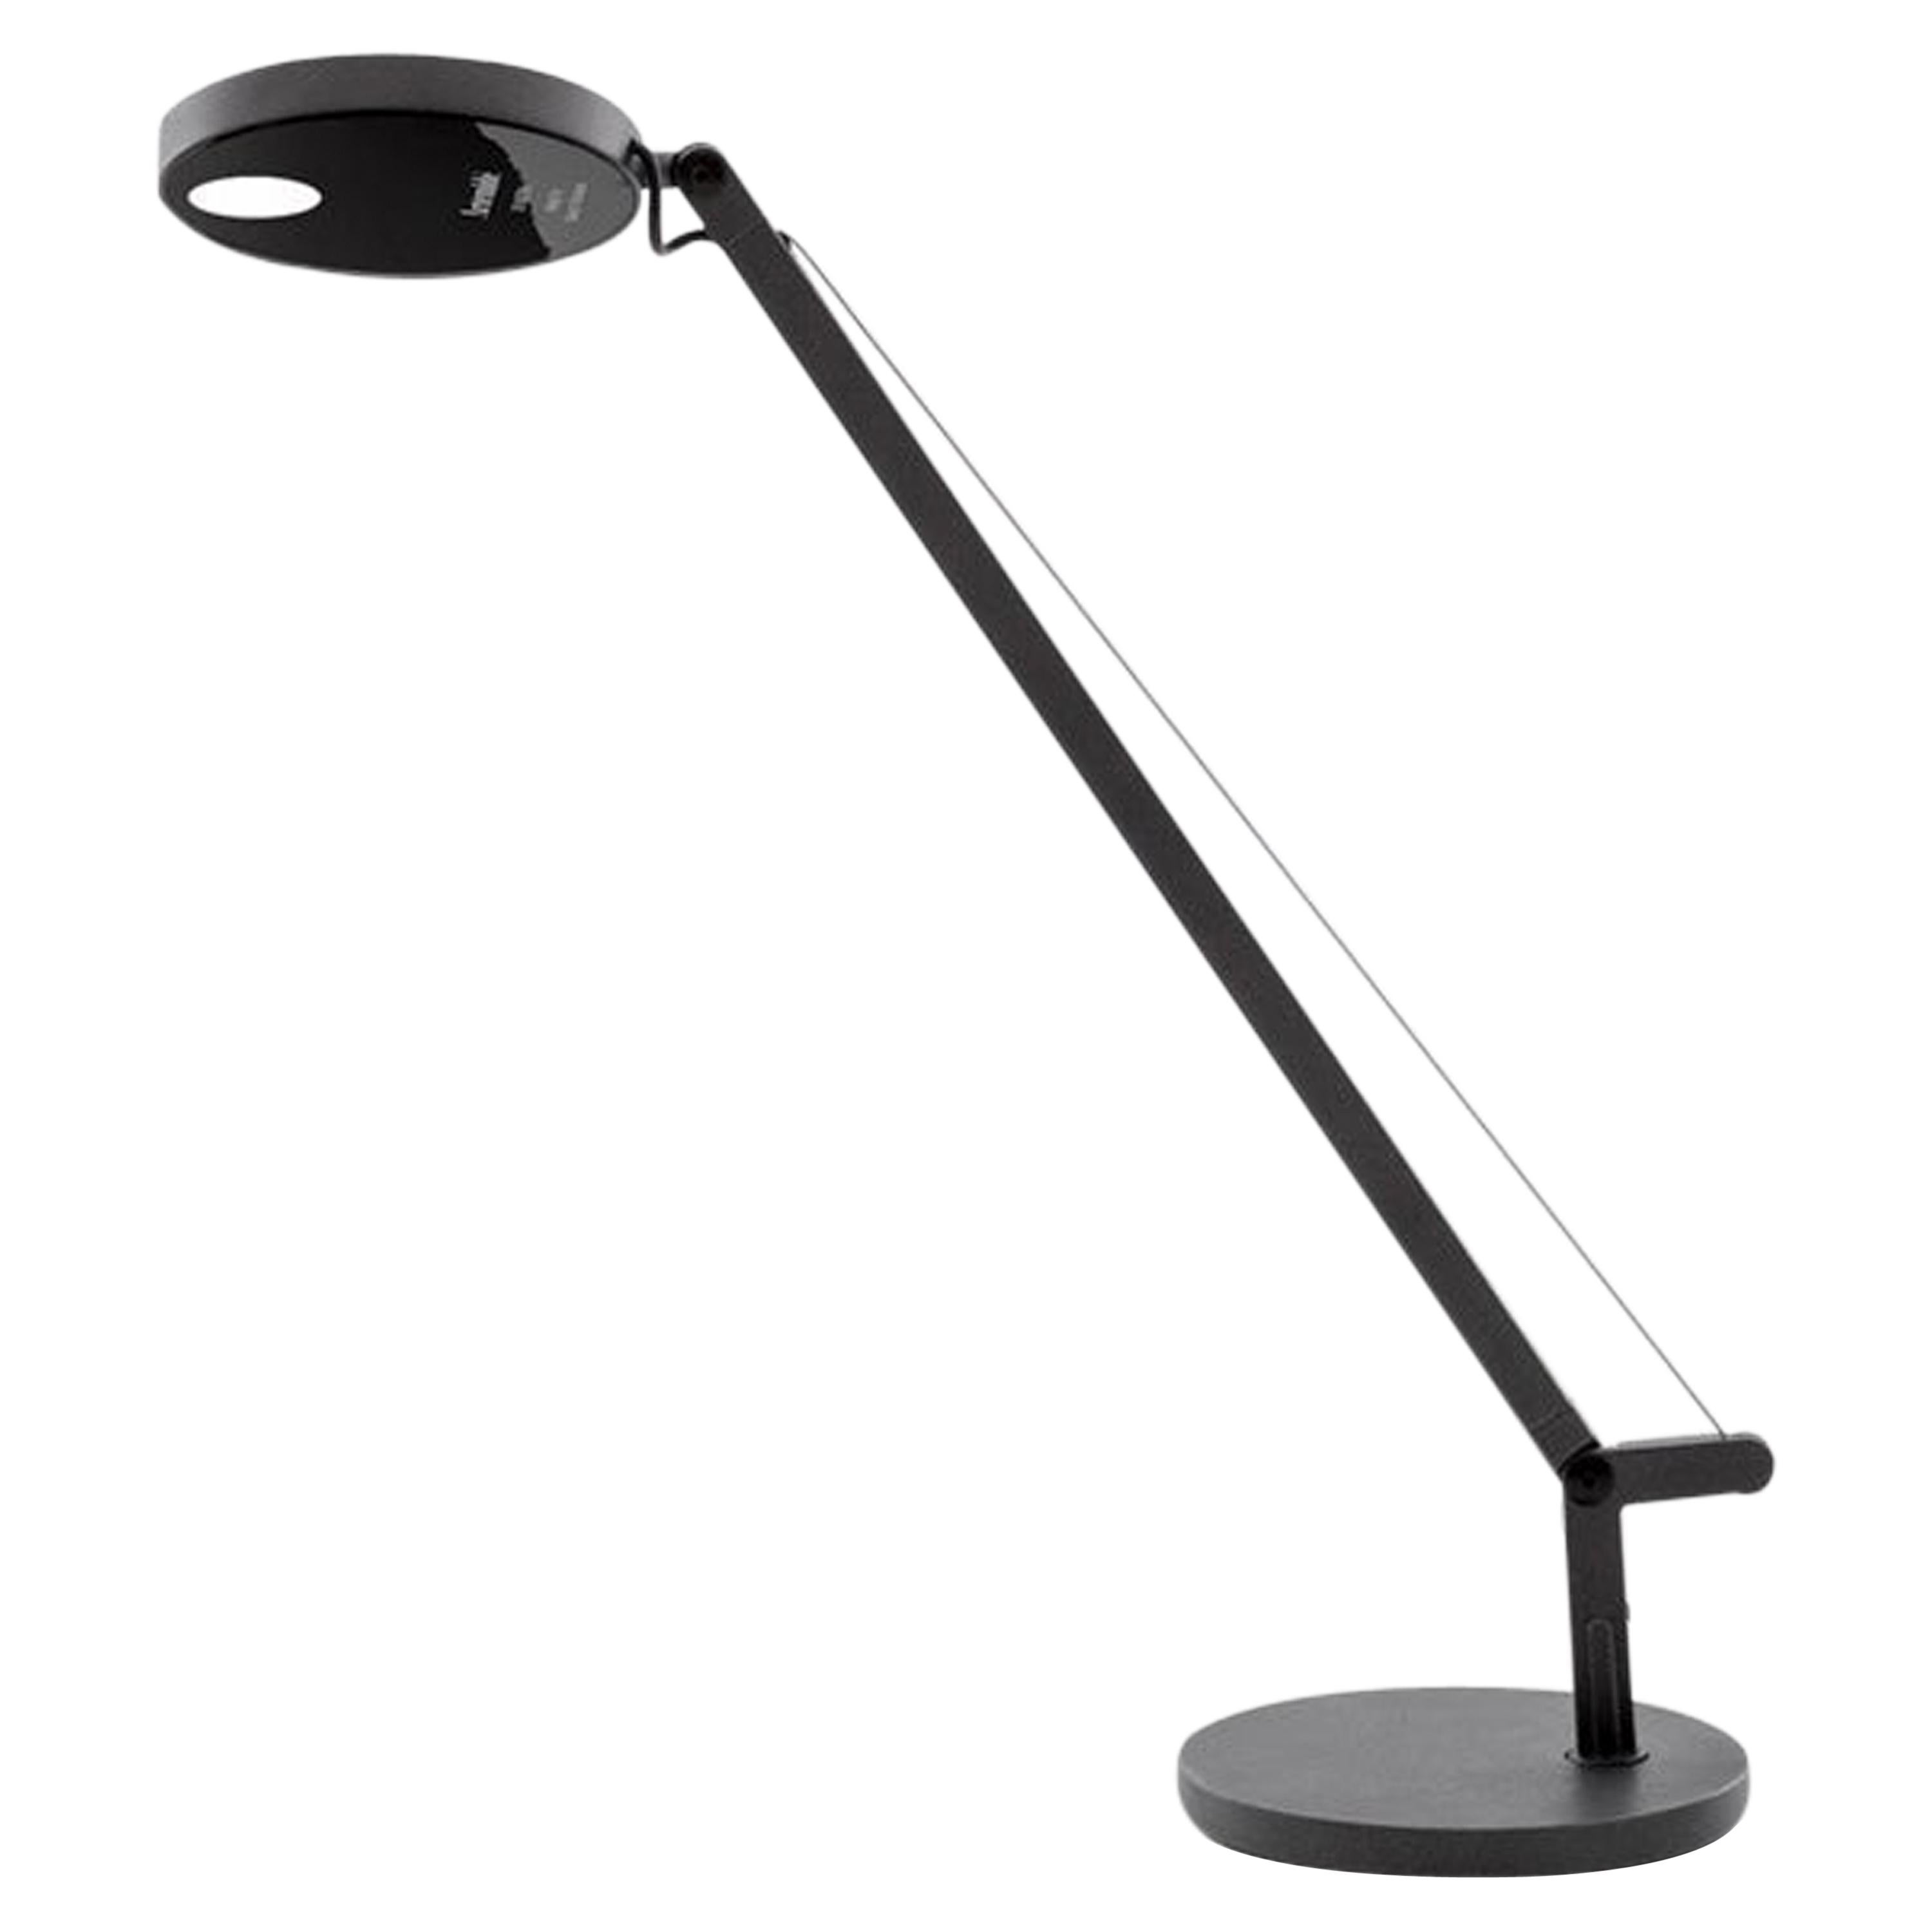 Artemide Demetra Micro LED 7W 30K Table Lamp in Anthracite Grey by Naoto Fukasaw For Sale